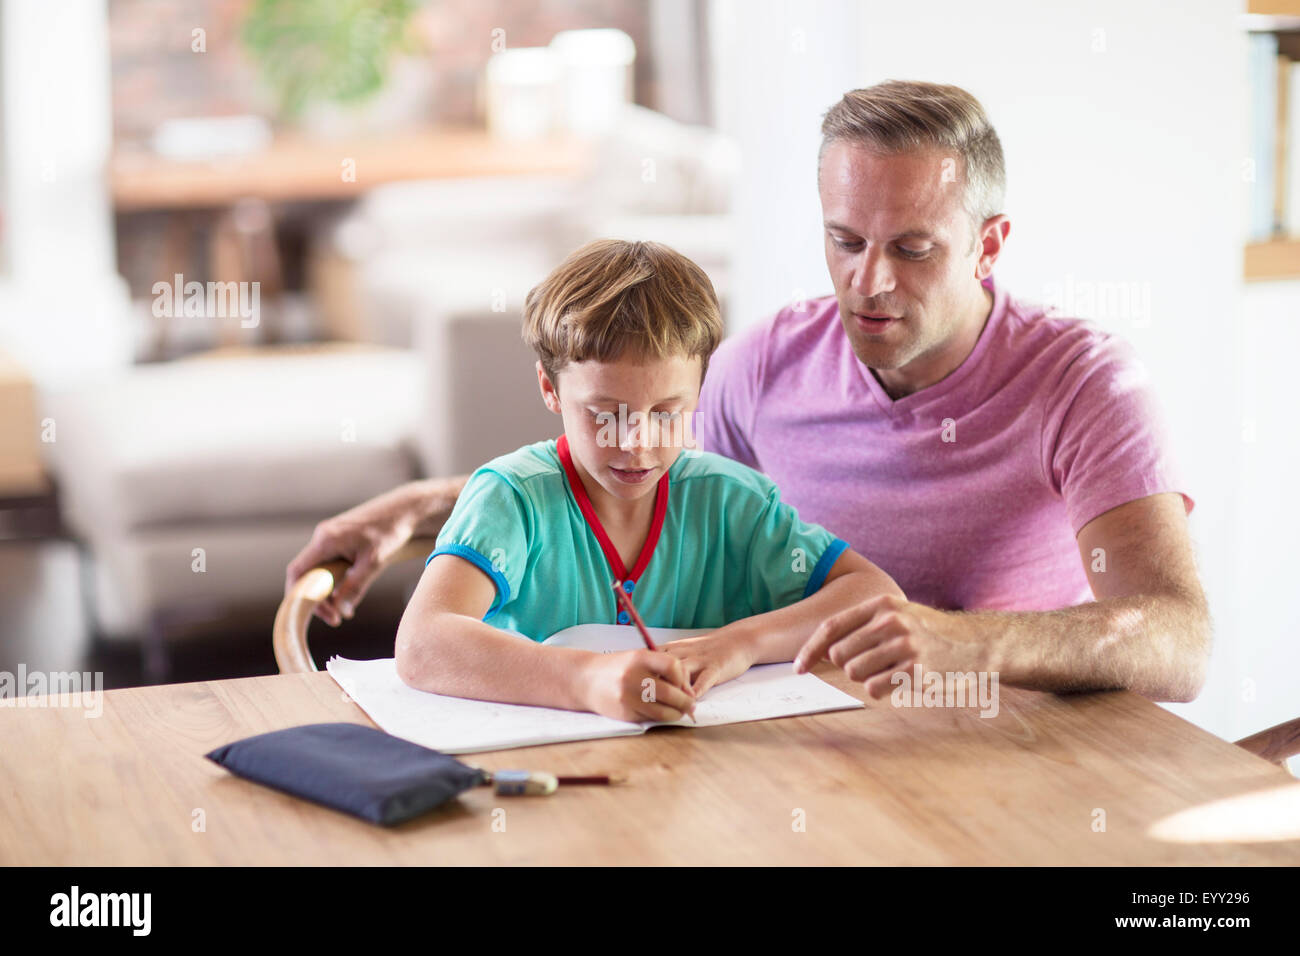 Caucasian father and son drawing at table Stock Photo